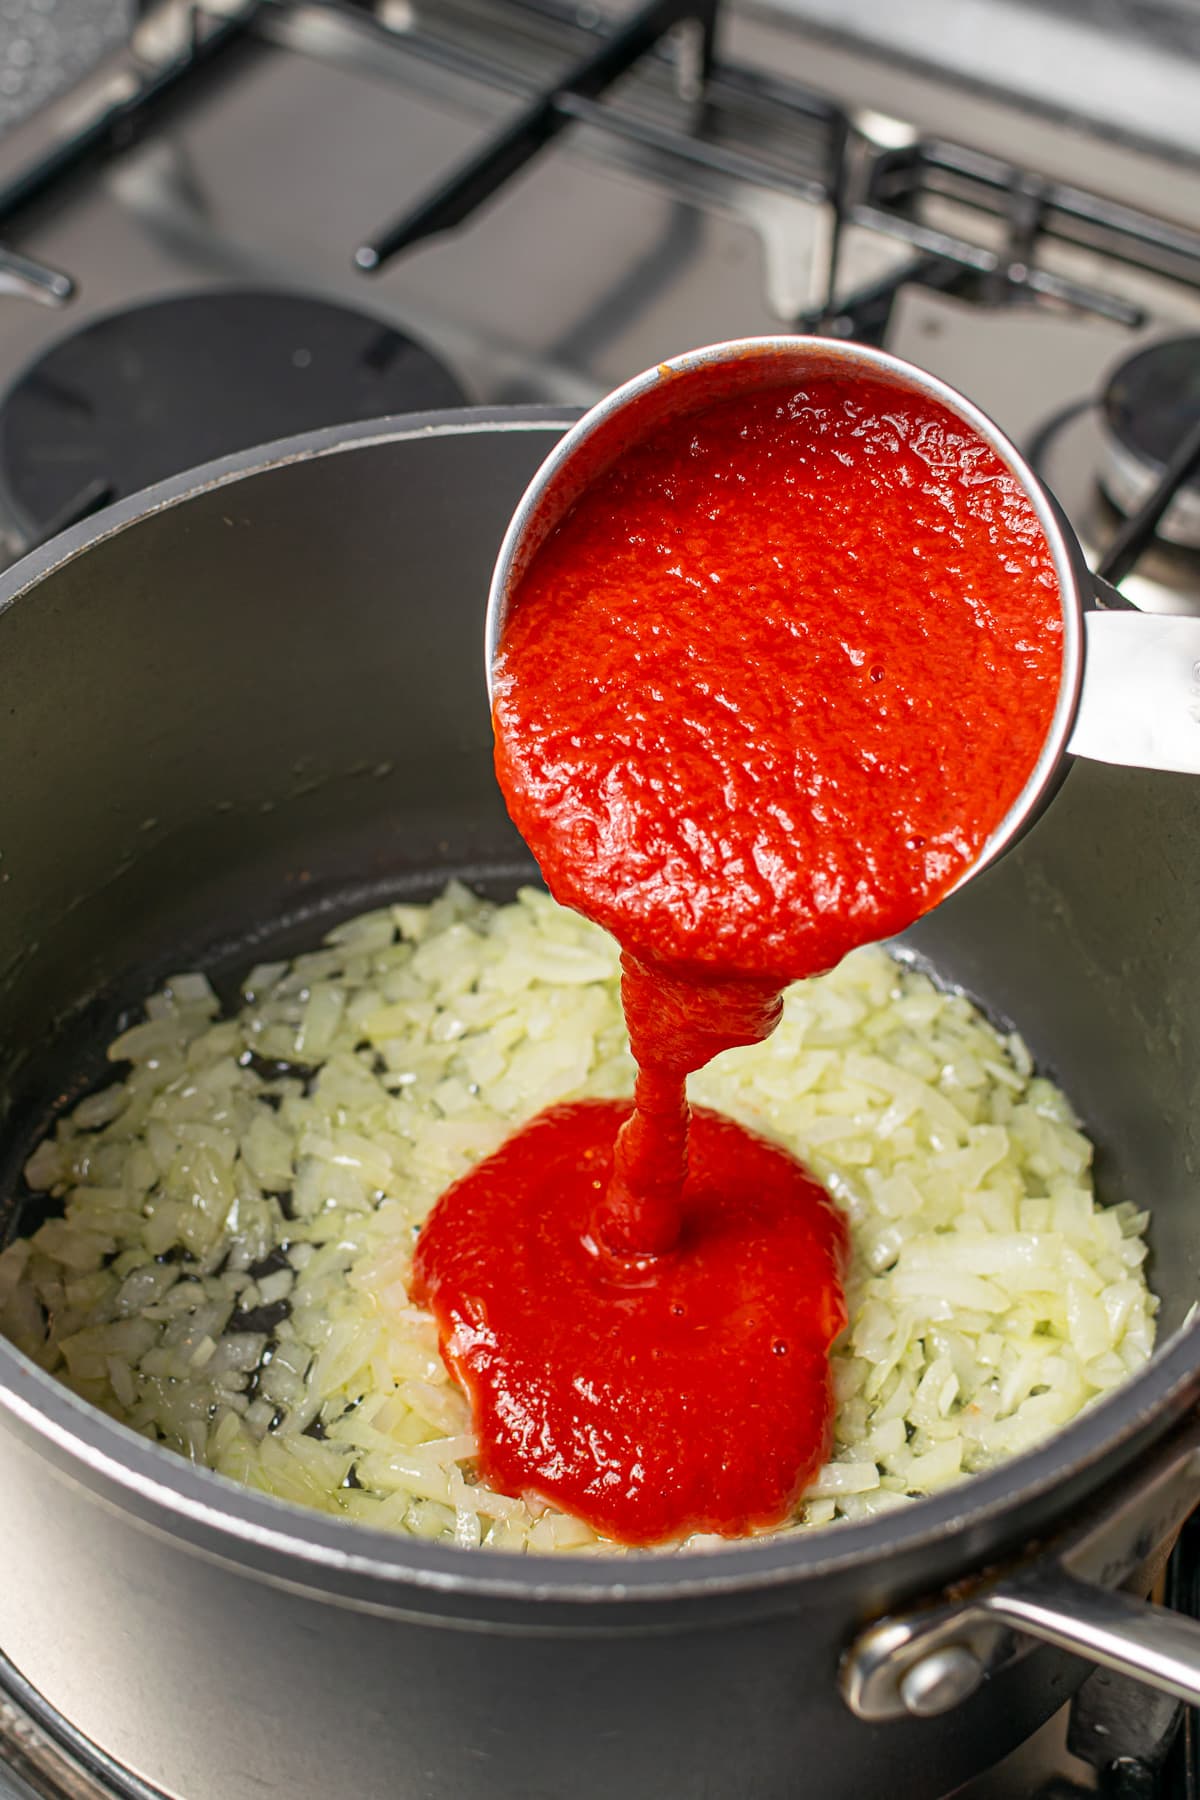 Tomato sauce being poured into a pot of sautéed onions on a stove.